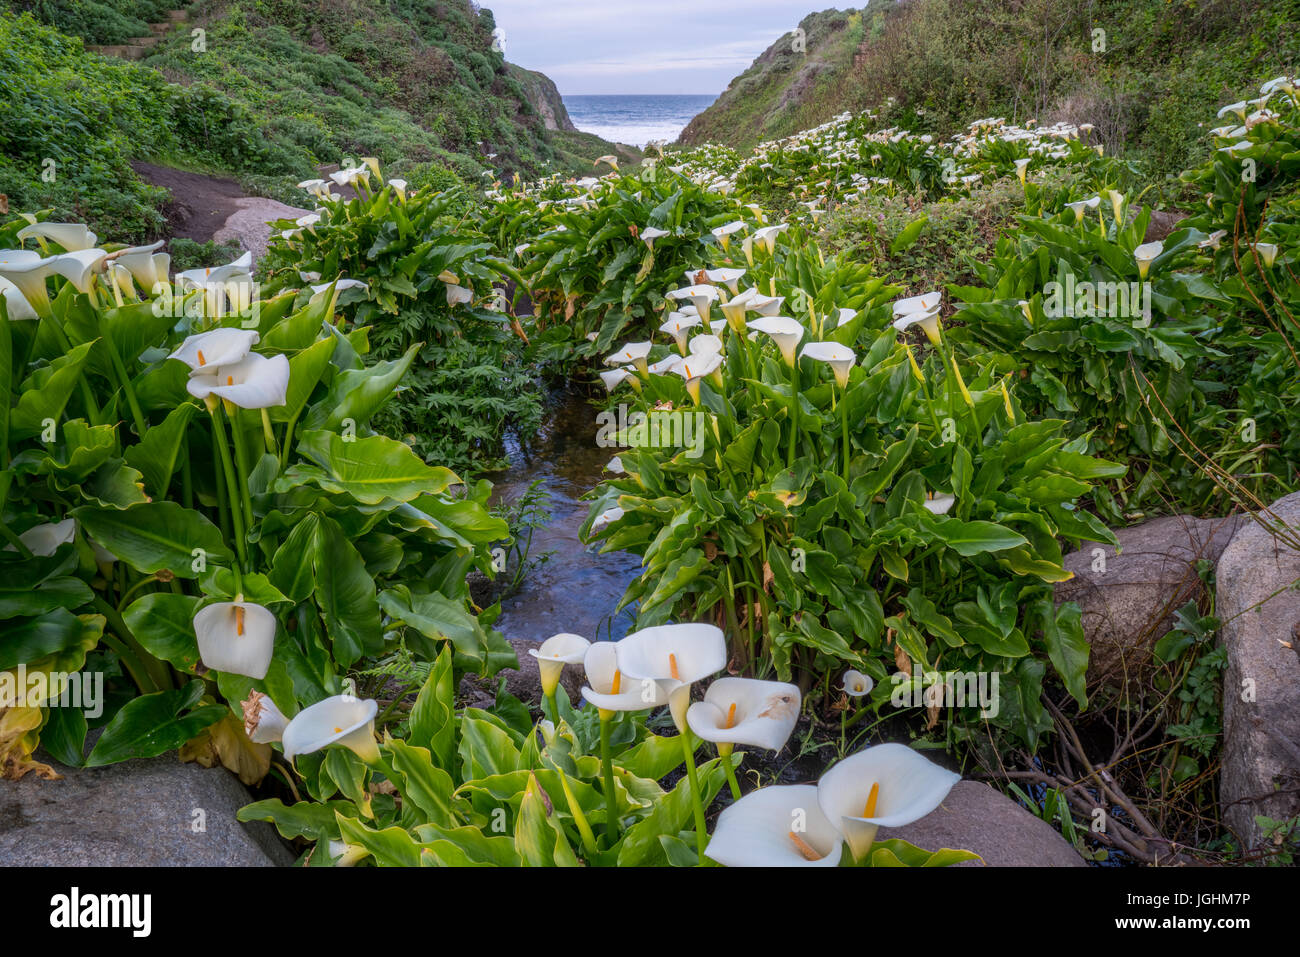 Wild lilies along a stream on the pacific coast of California Stock Photo